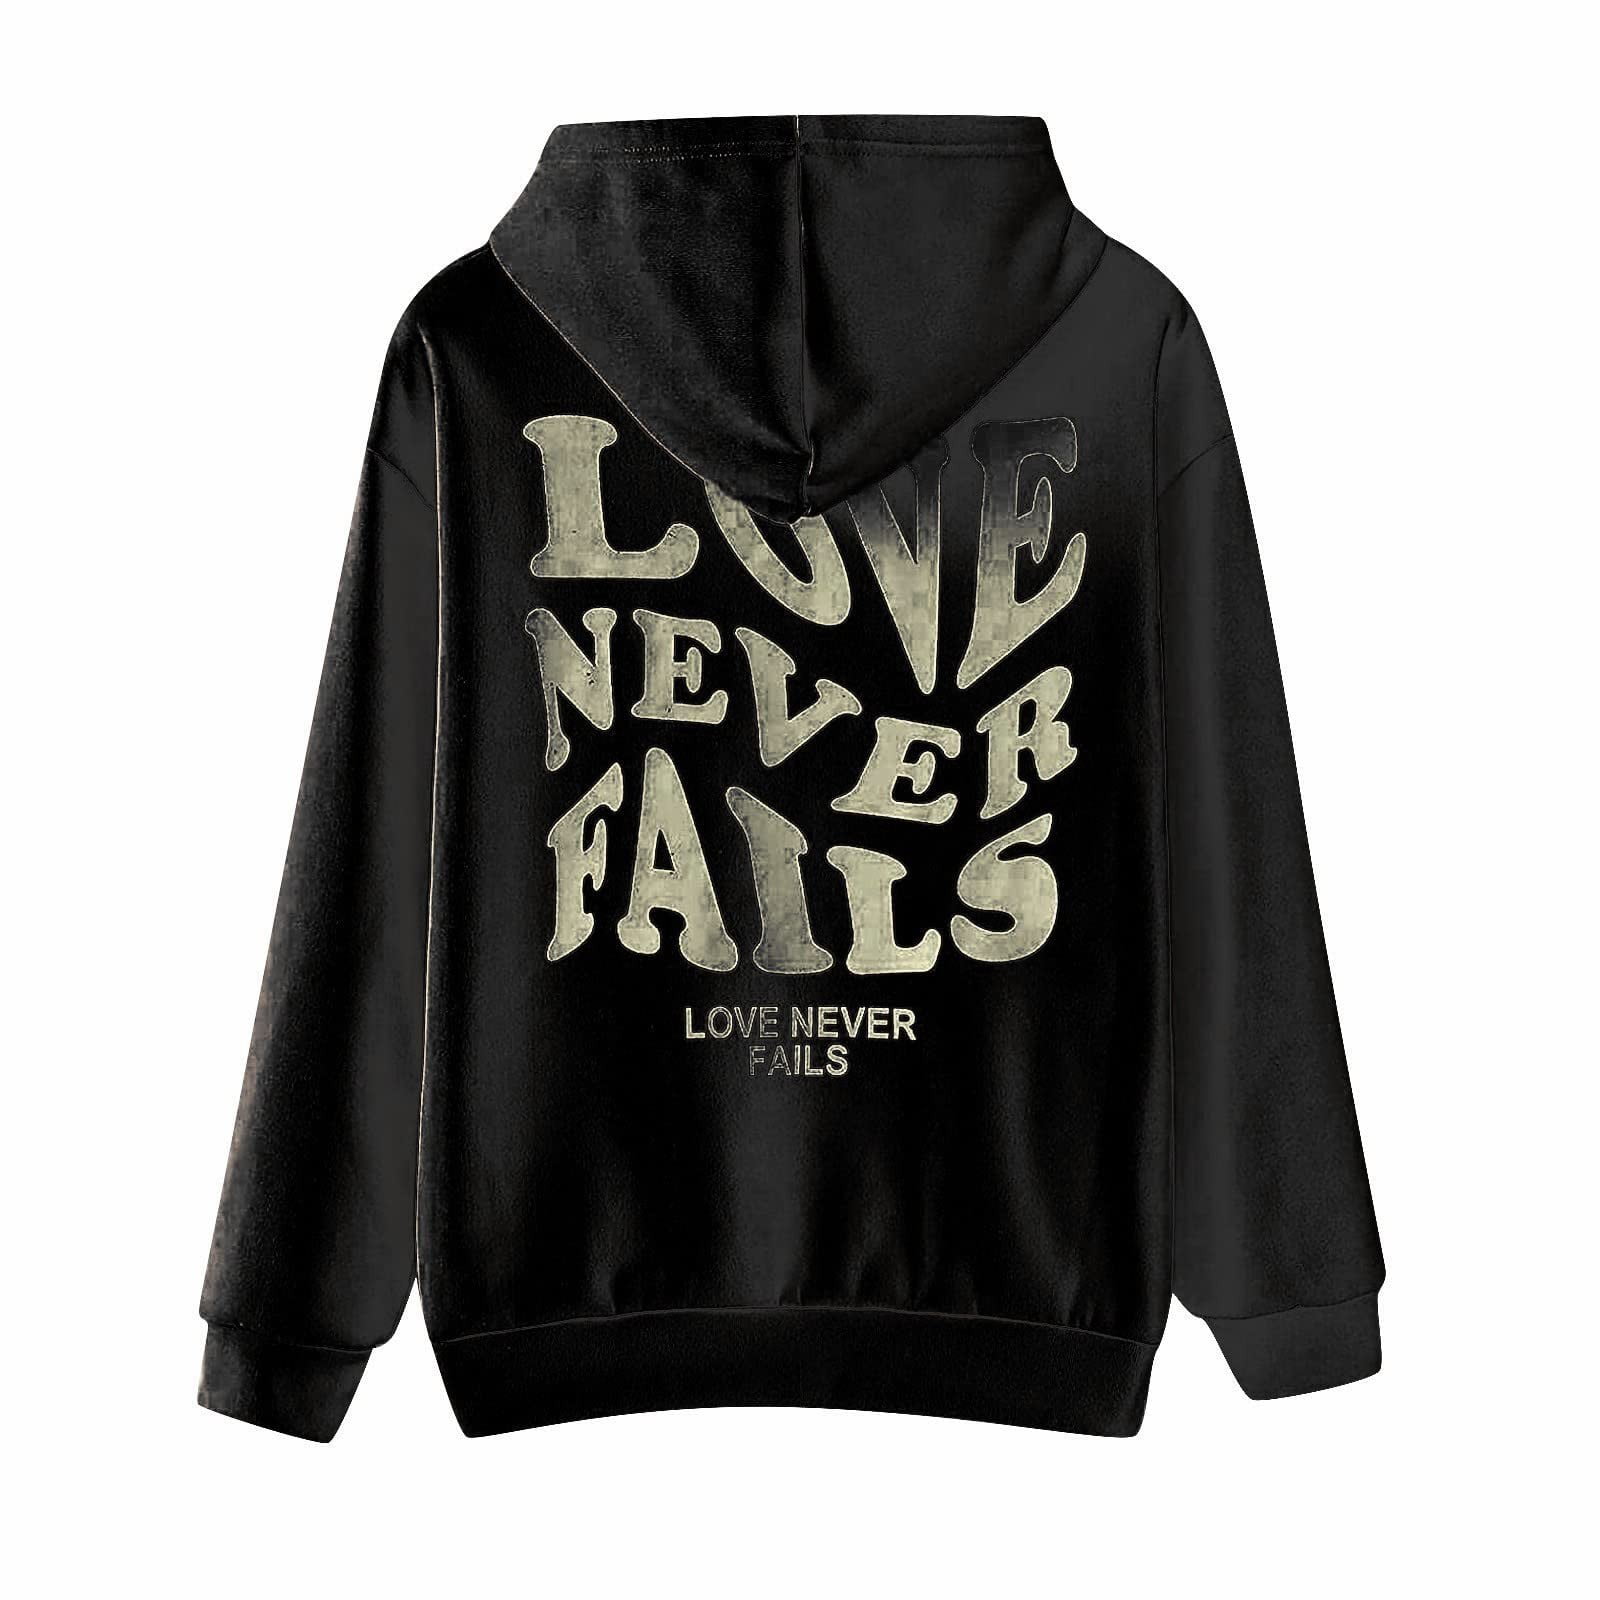 Buy Your Love Never Fails - Microsoft Store